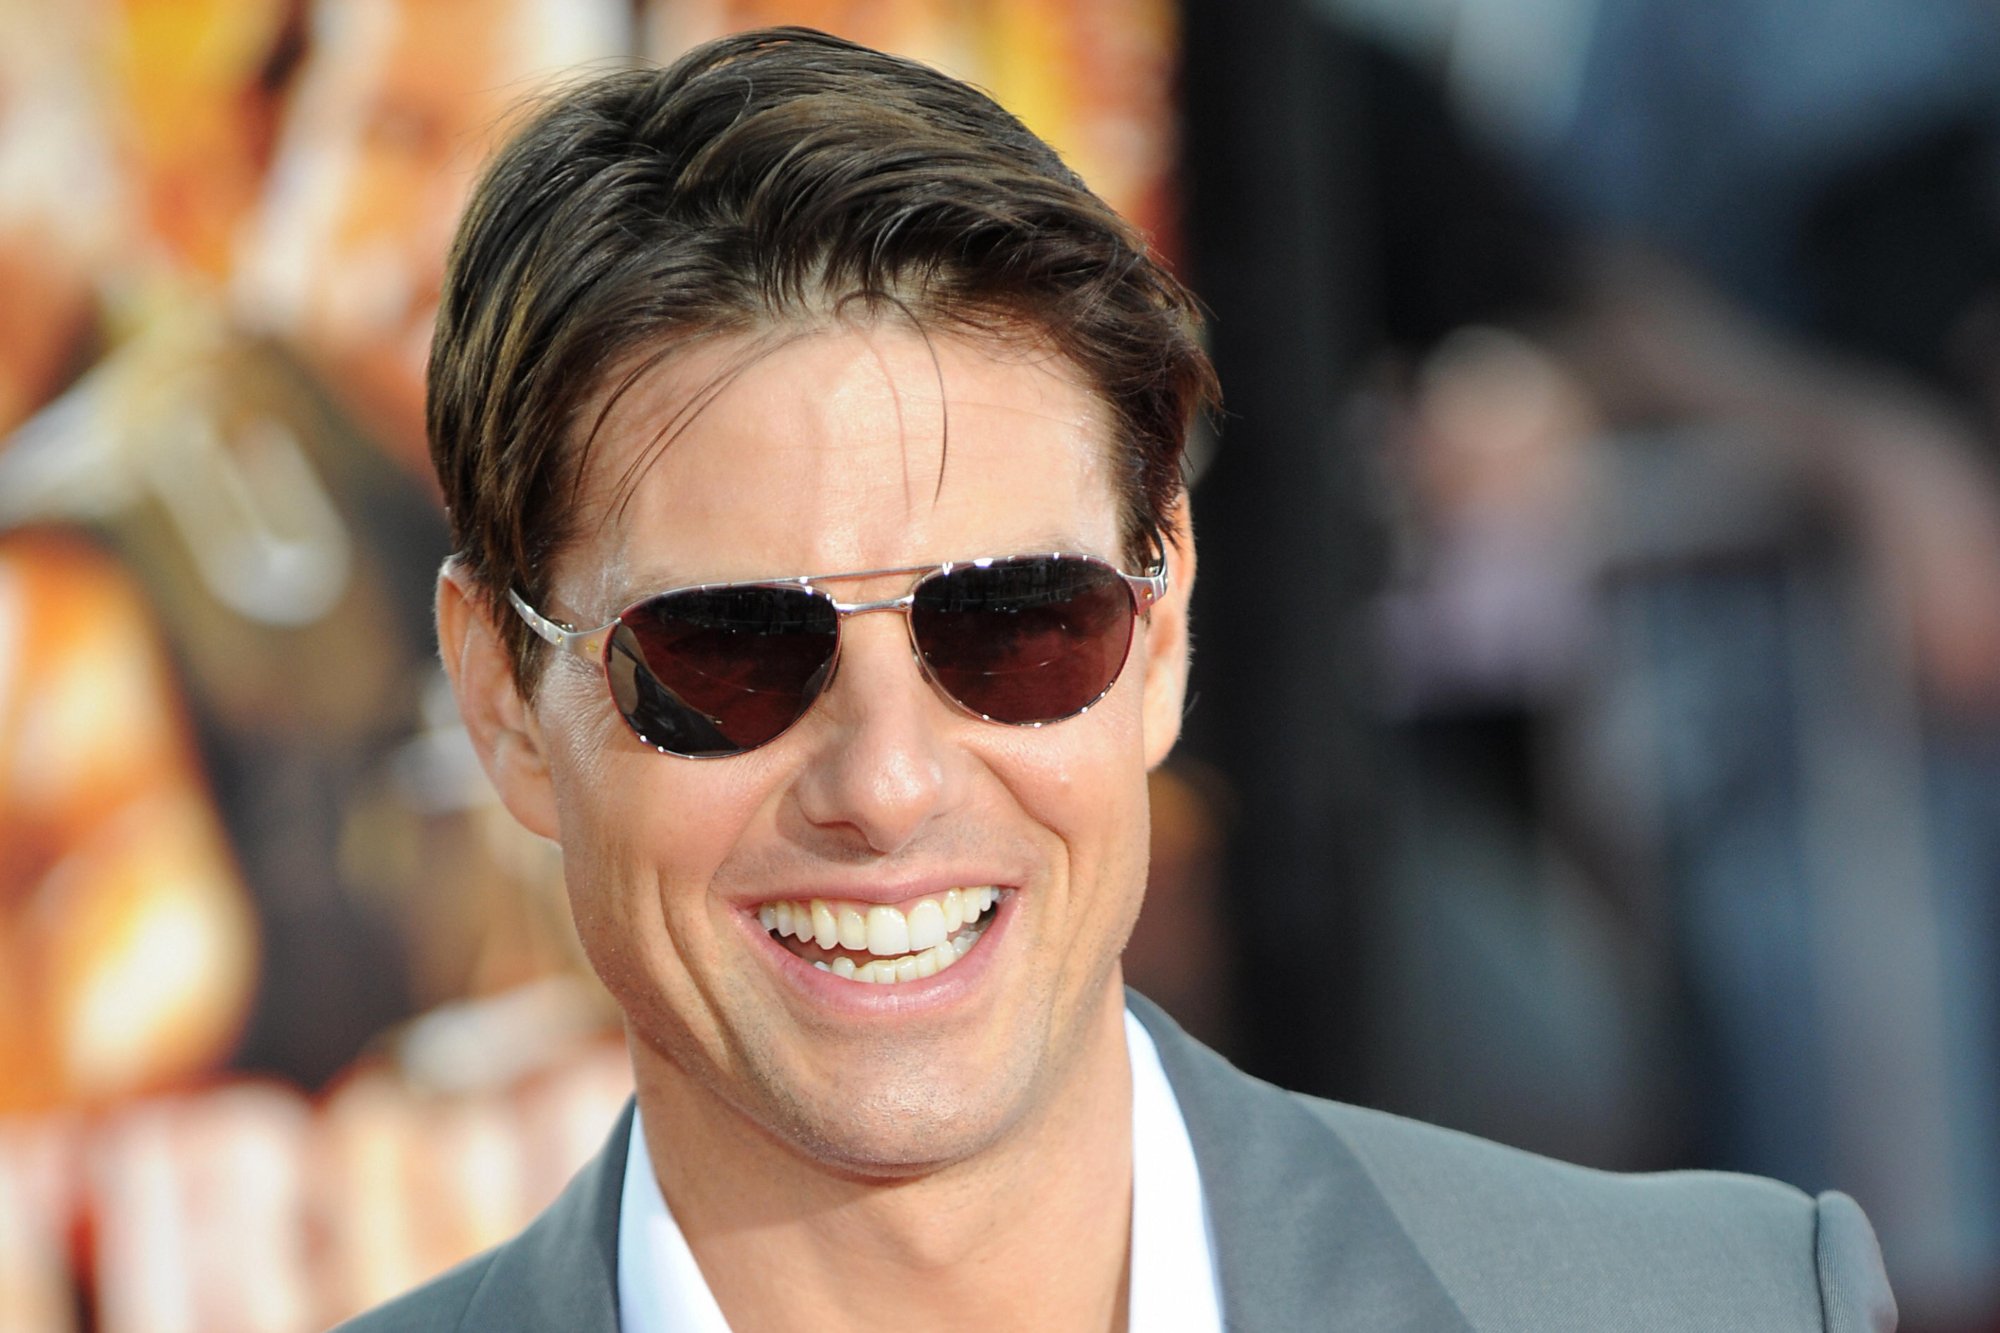 'Tropic Thunder' actor Tom Cruise, who played Les Grossman. He's smiling, wearing aviator sunglasses, and a grey suit in front of the movie poster.